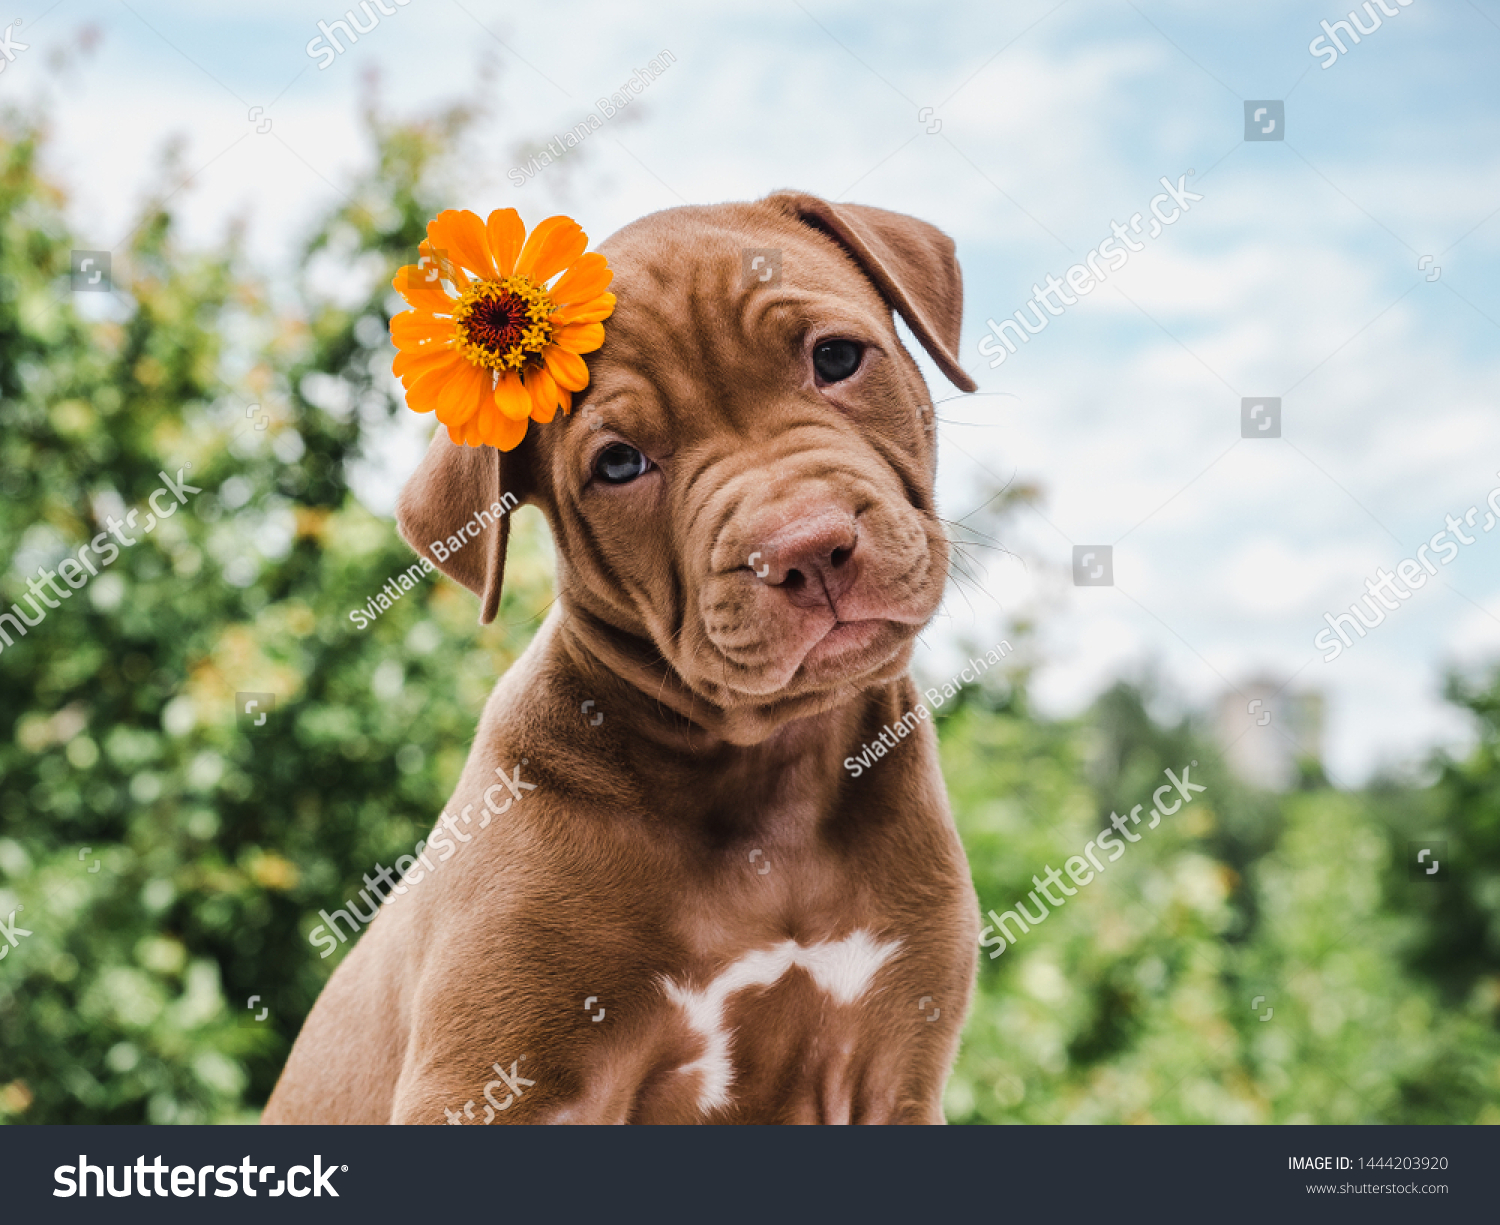 Cute, charming puppy, sitting on a soft rug on a background of green trees, blue sky and clouds on a clear, summer day. Close-up. Pet care concept